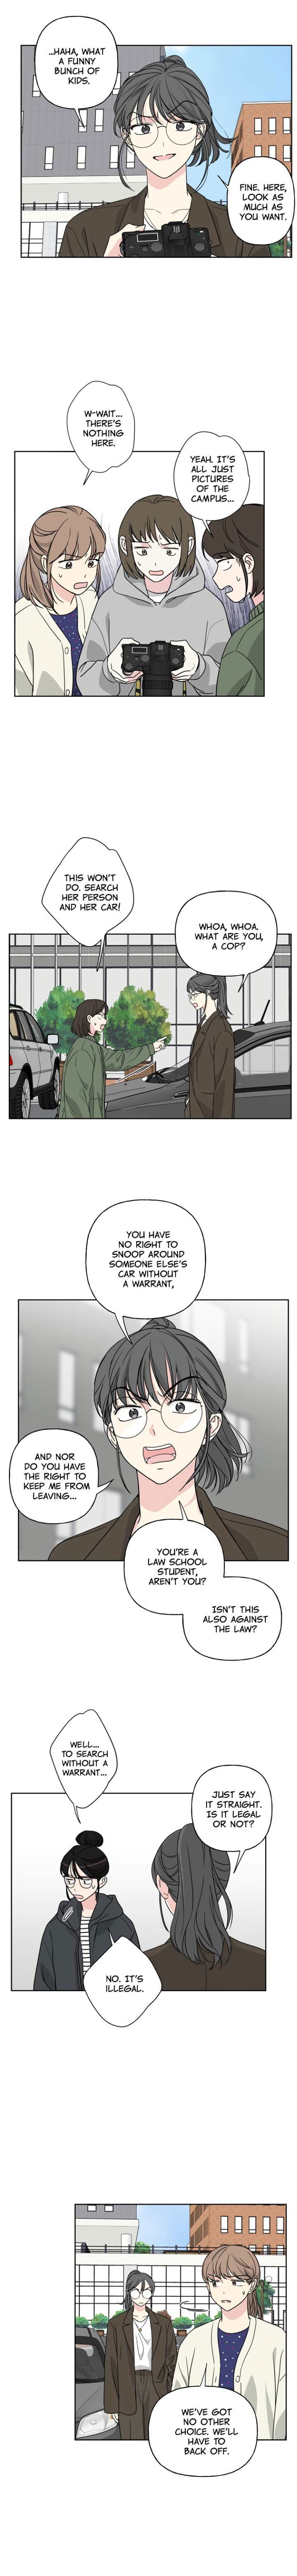 mother-im-sorry-chap-30-10